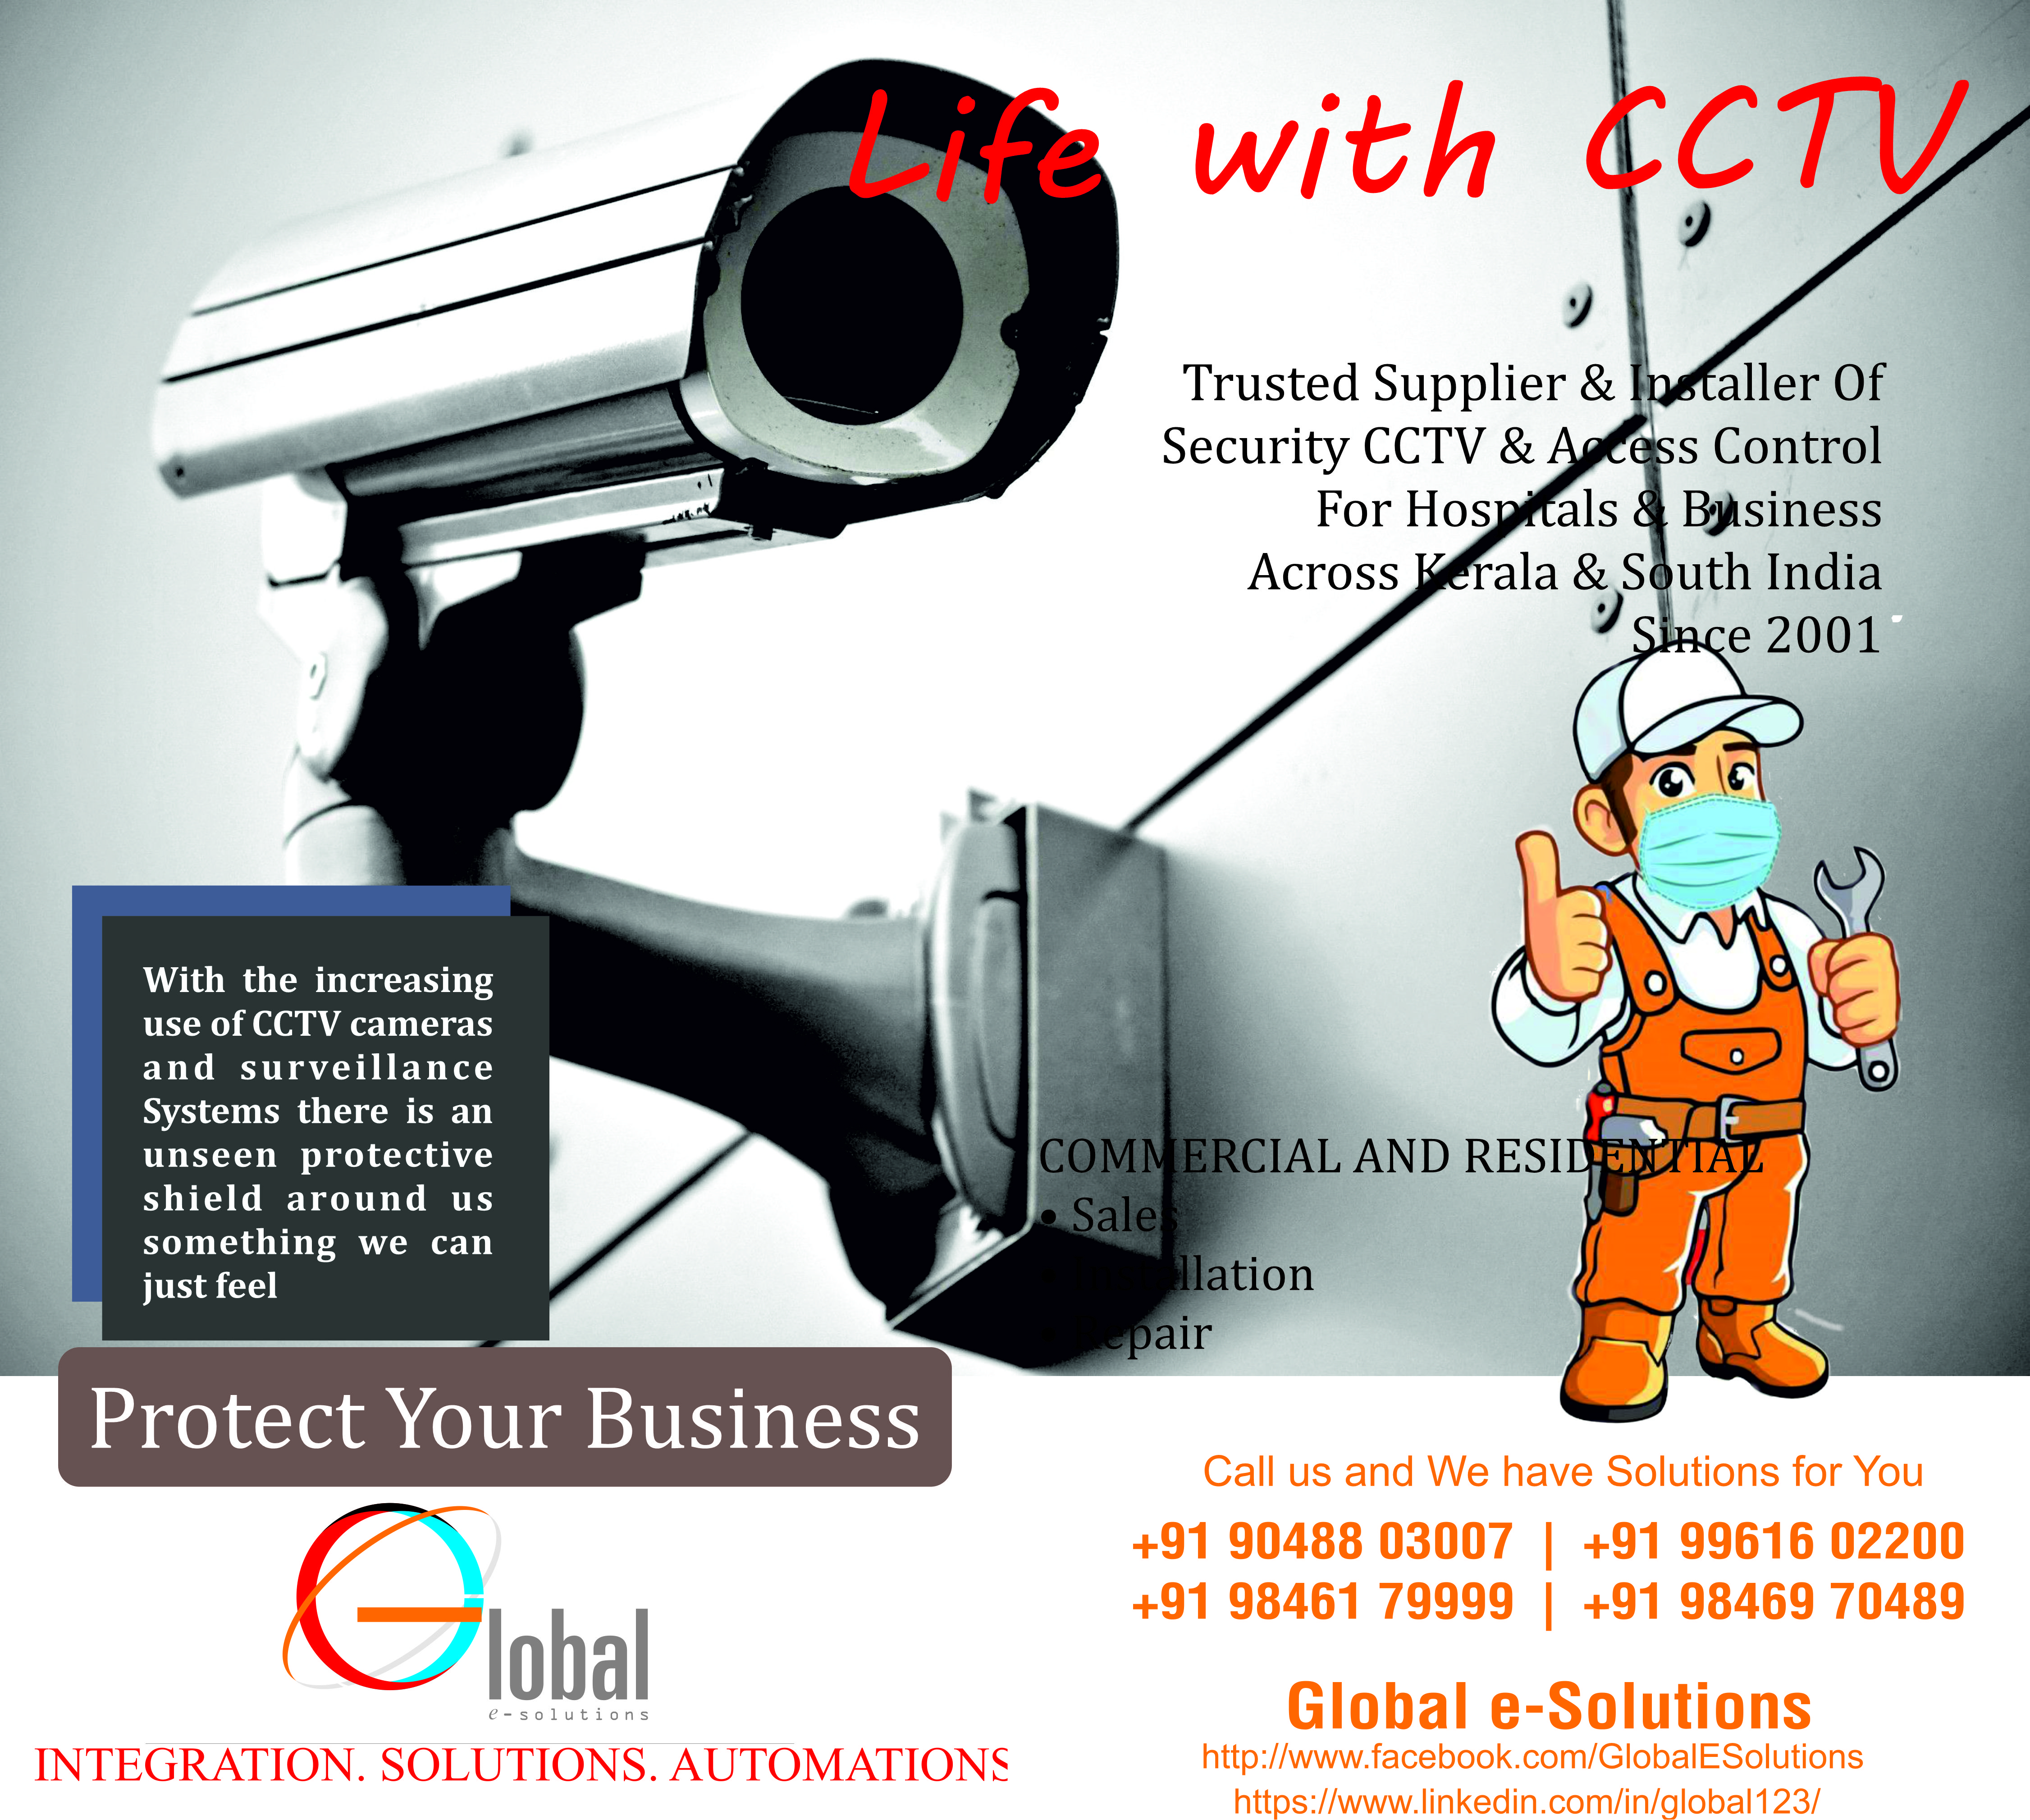 Commercial CCTV Installation If you’d like to learn more about our innovative security solutions